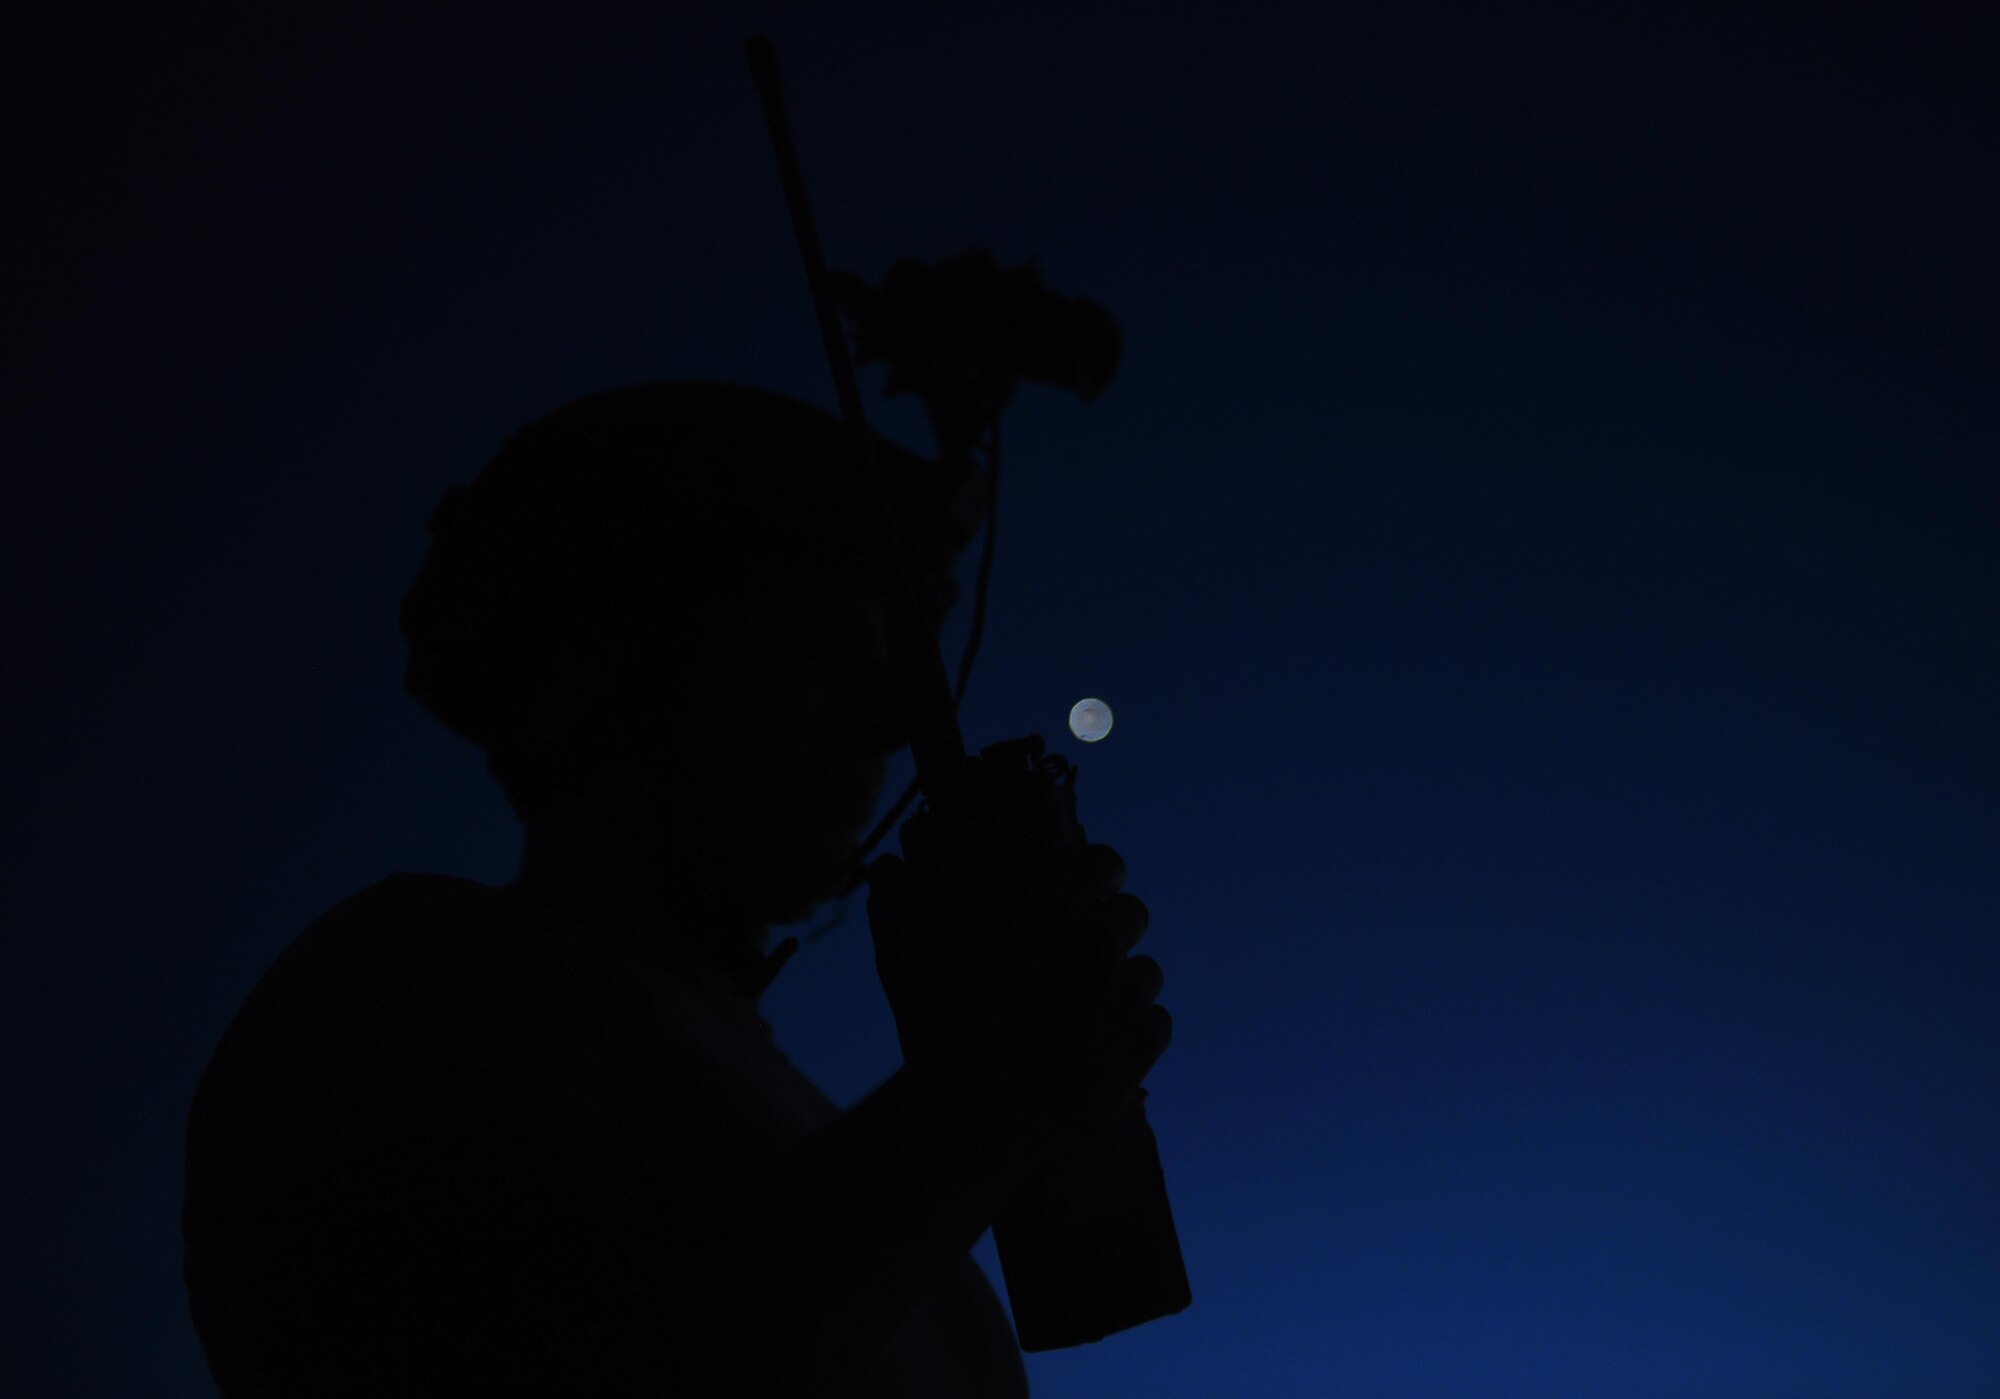 Senior Airman Caleb Brooks, 1st Special Operations Security Forces Squadron deployed aircraft ground response element, communicates target coordinates to a AC-130 “Spooky” gunship during a call for fire exercise, June 16, 2015, at Eglin Range, Fla. Aircrew members communicated closely with ground-range operators to ensure the gunship's rounds hit simulated enemy targets. (U.S. Air Force photo by Airman 1st Class Ryan Conroy/Released)